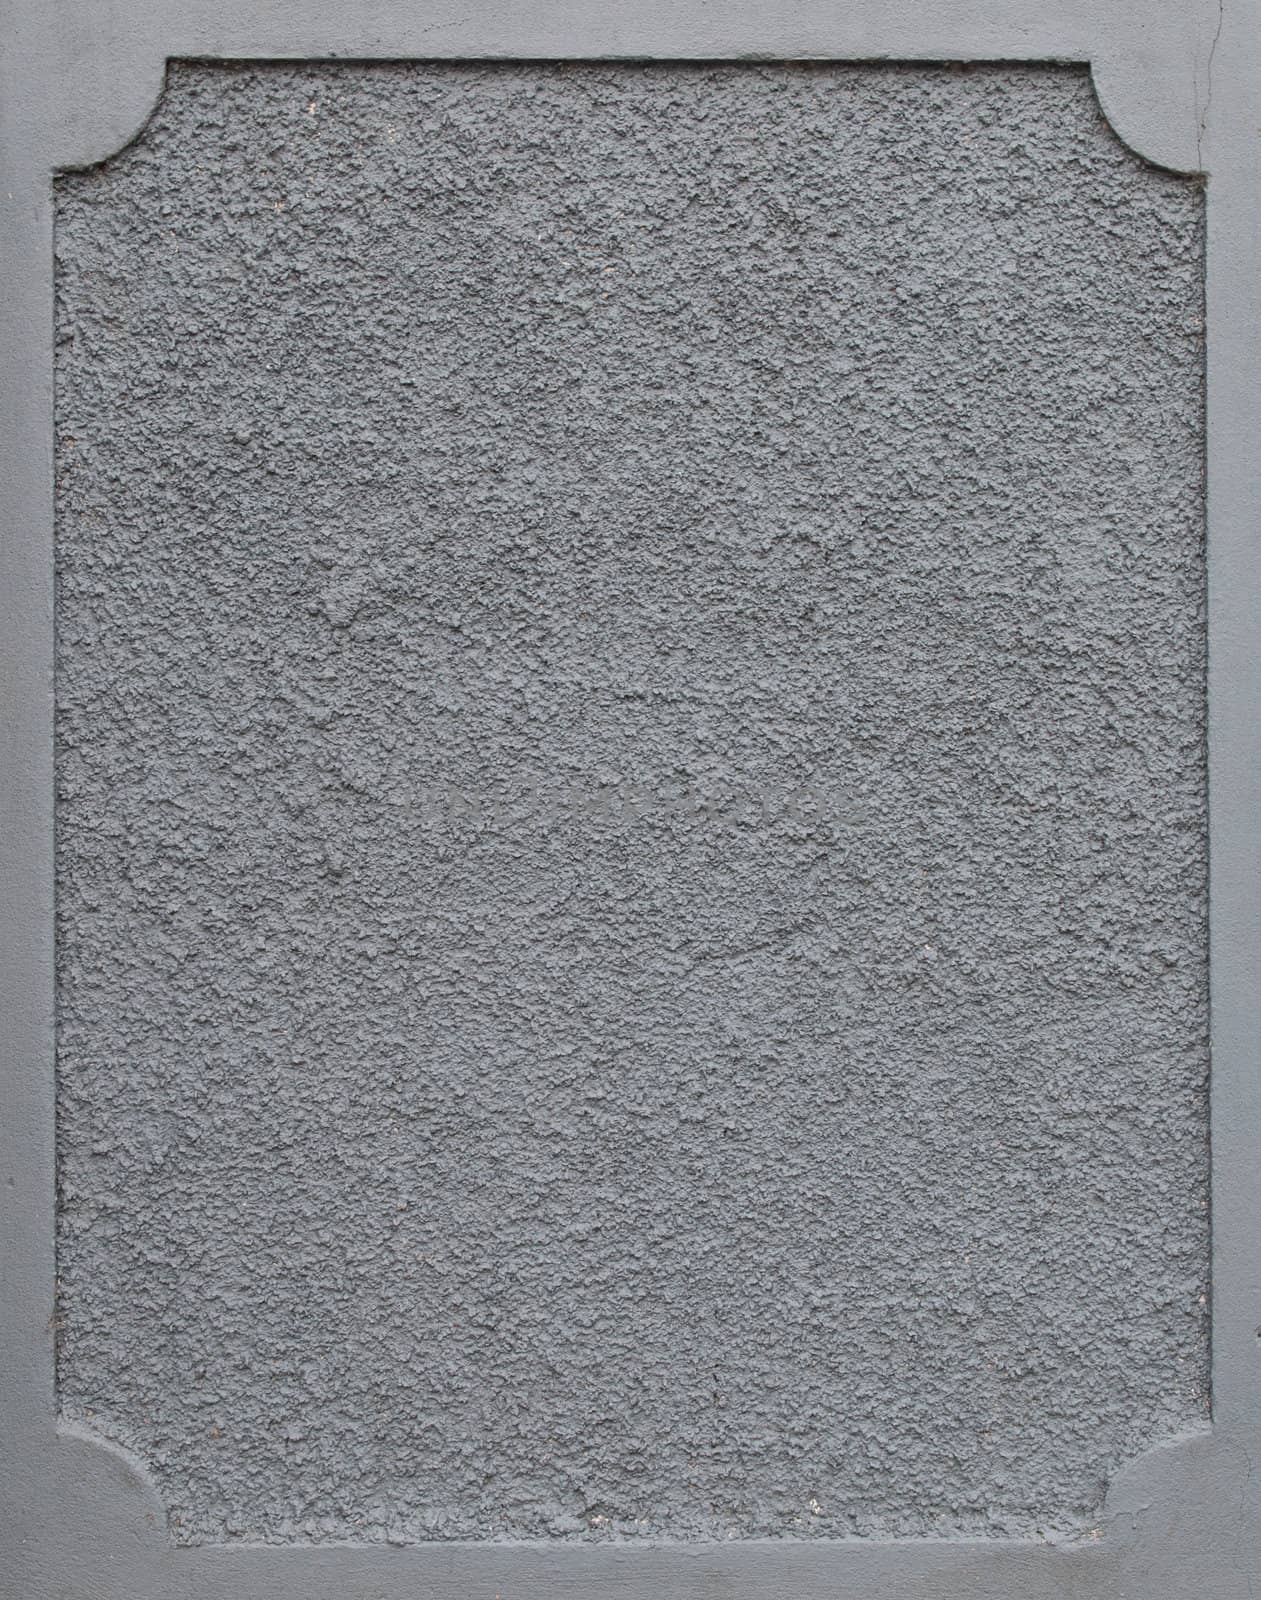 frame on a grey plaster wall (copy-space available for design)